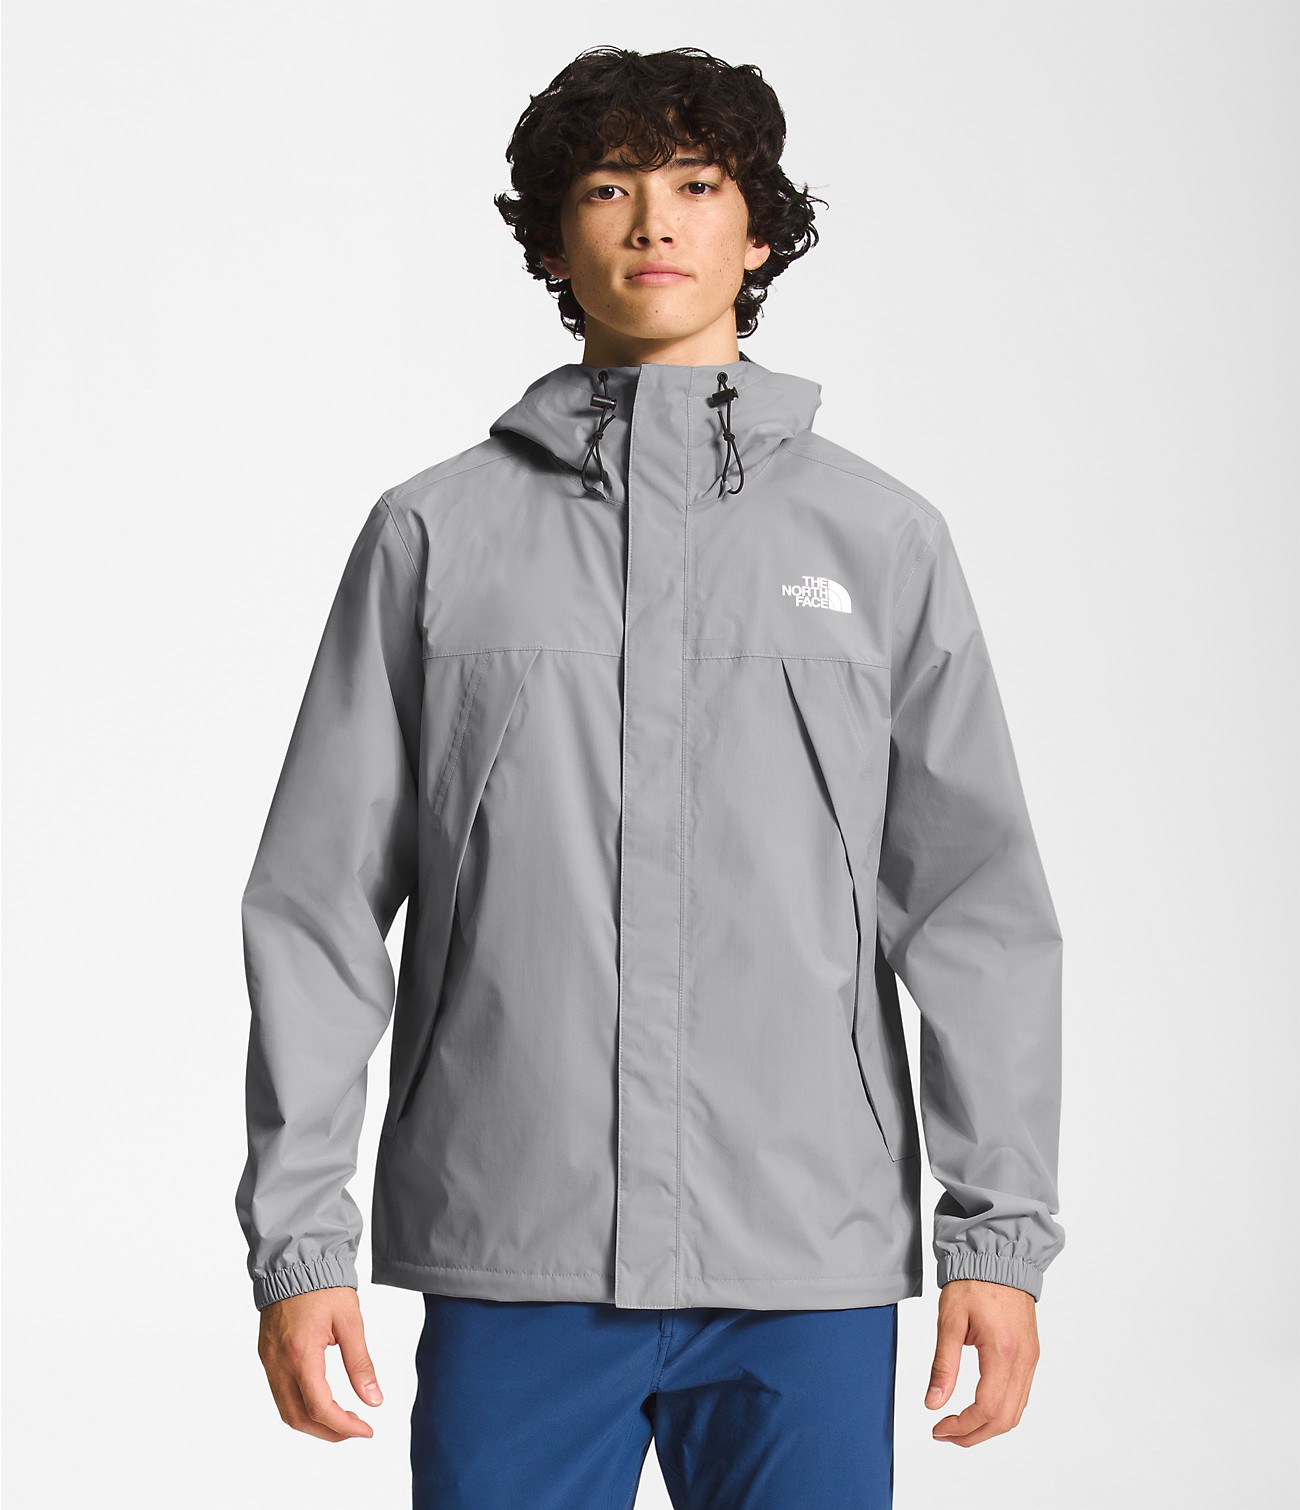 Unlock Wilderness' choice in the Decathlon Vs North Face comparison, the Antora Jacket by The North Face